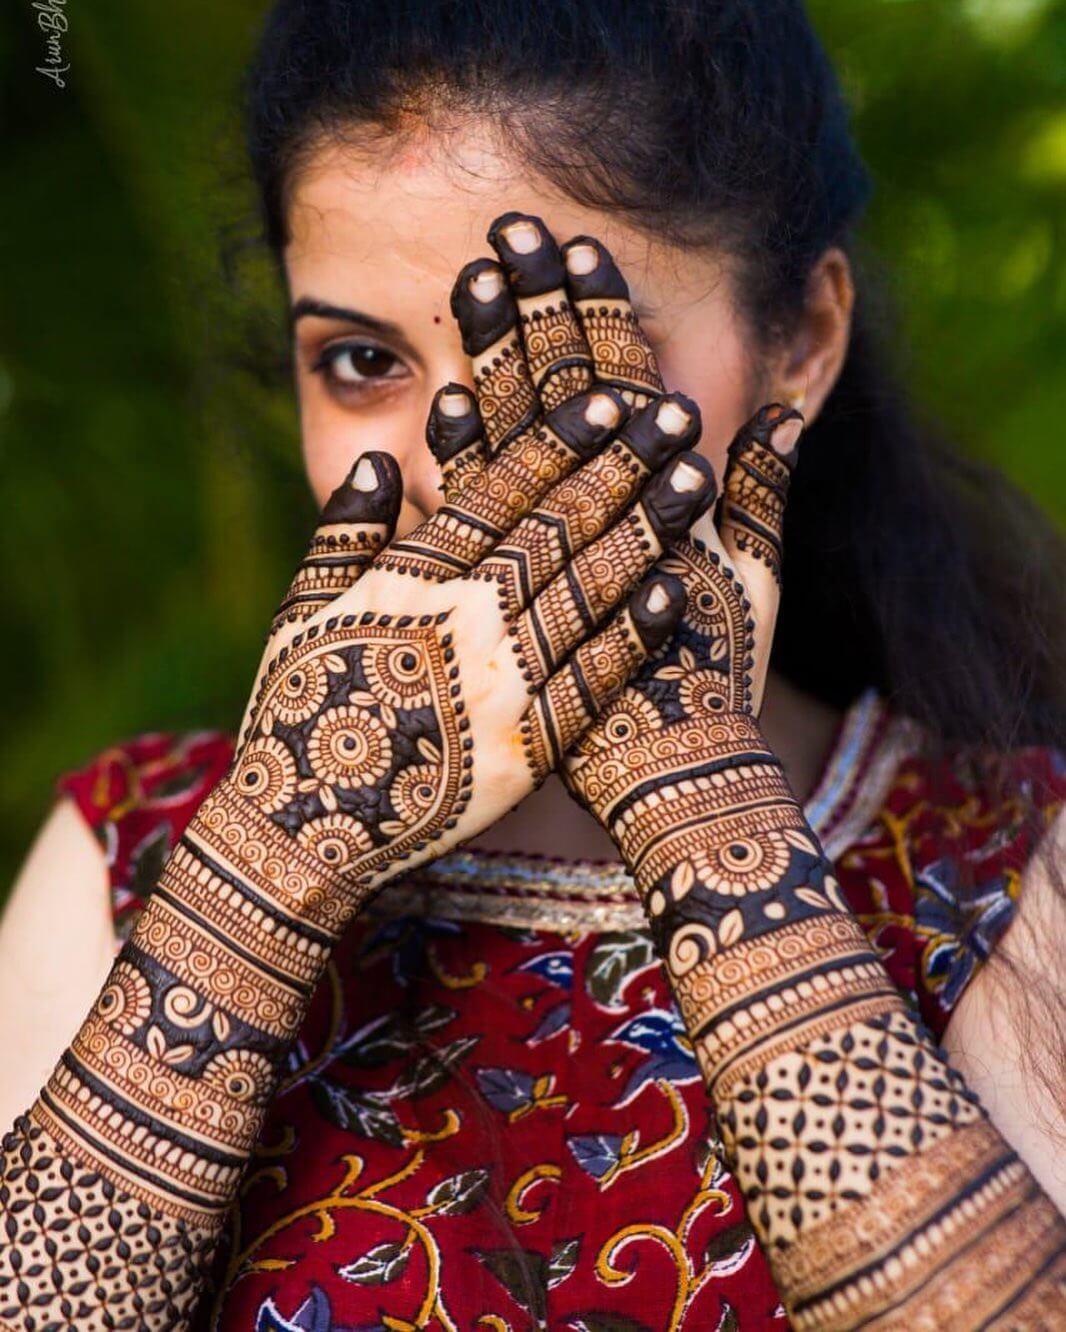 Decorative henna art for both the front and back of the bride's hands.